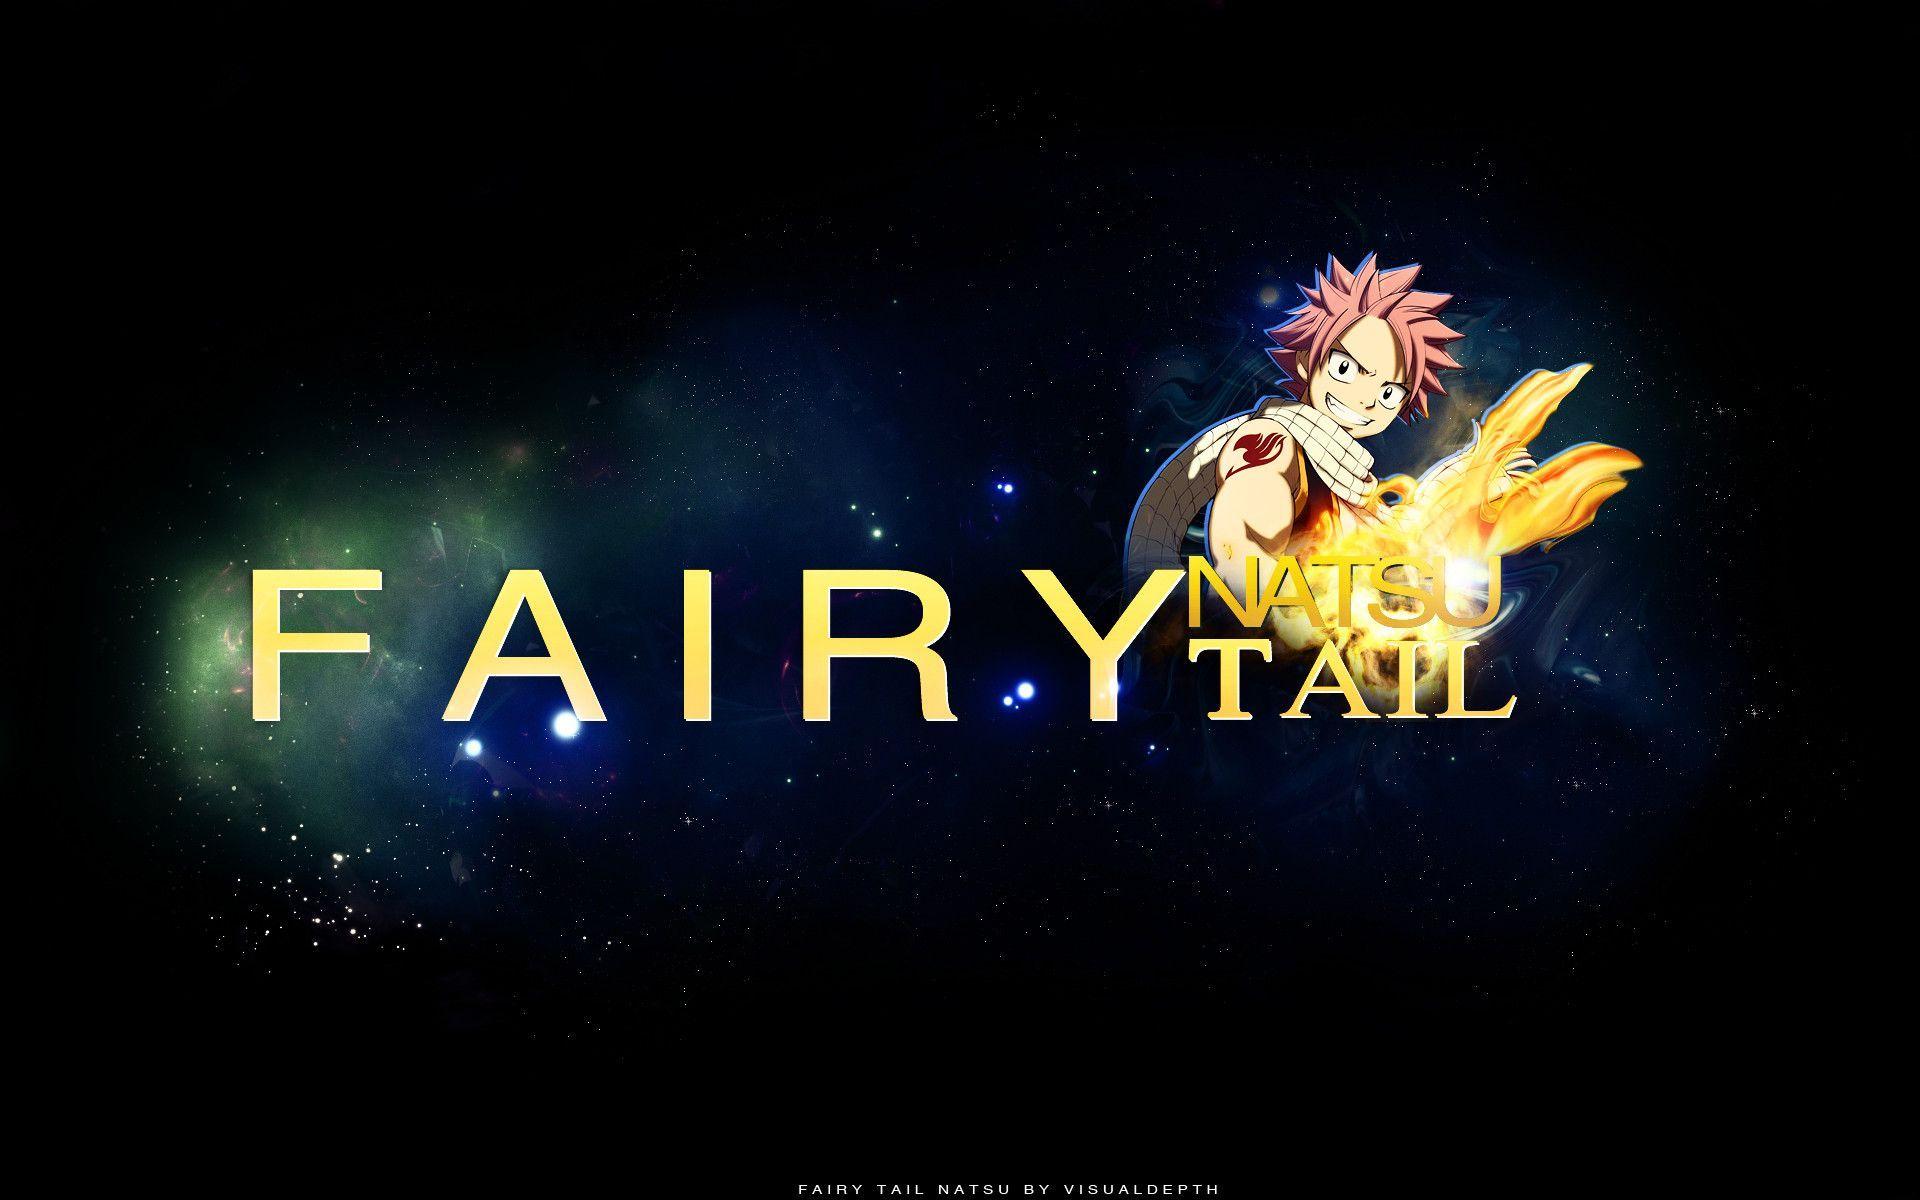 Fairy Tail Computer Wallpapers, Desktop Backgrounds 1920x1200 Id